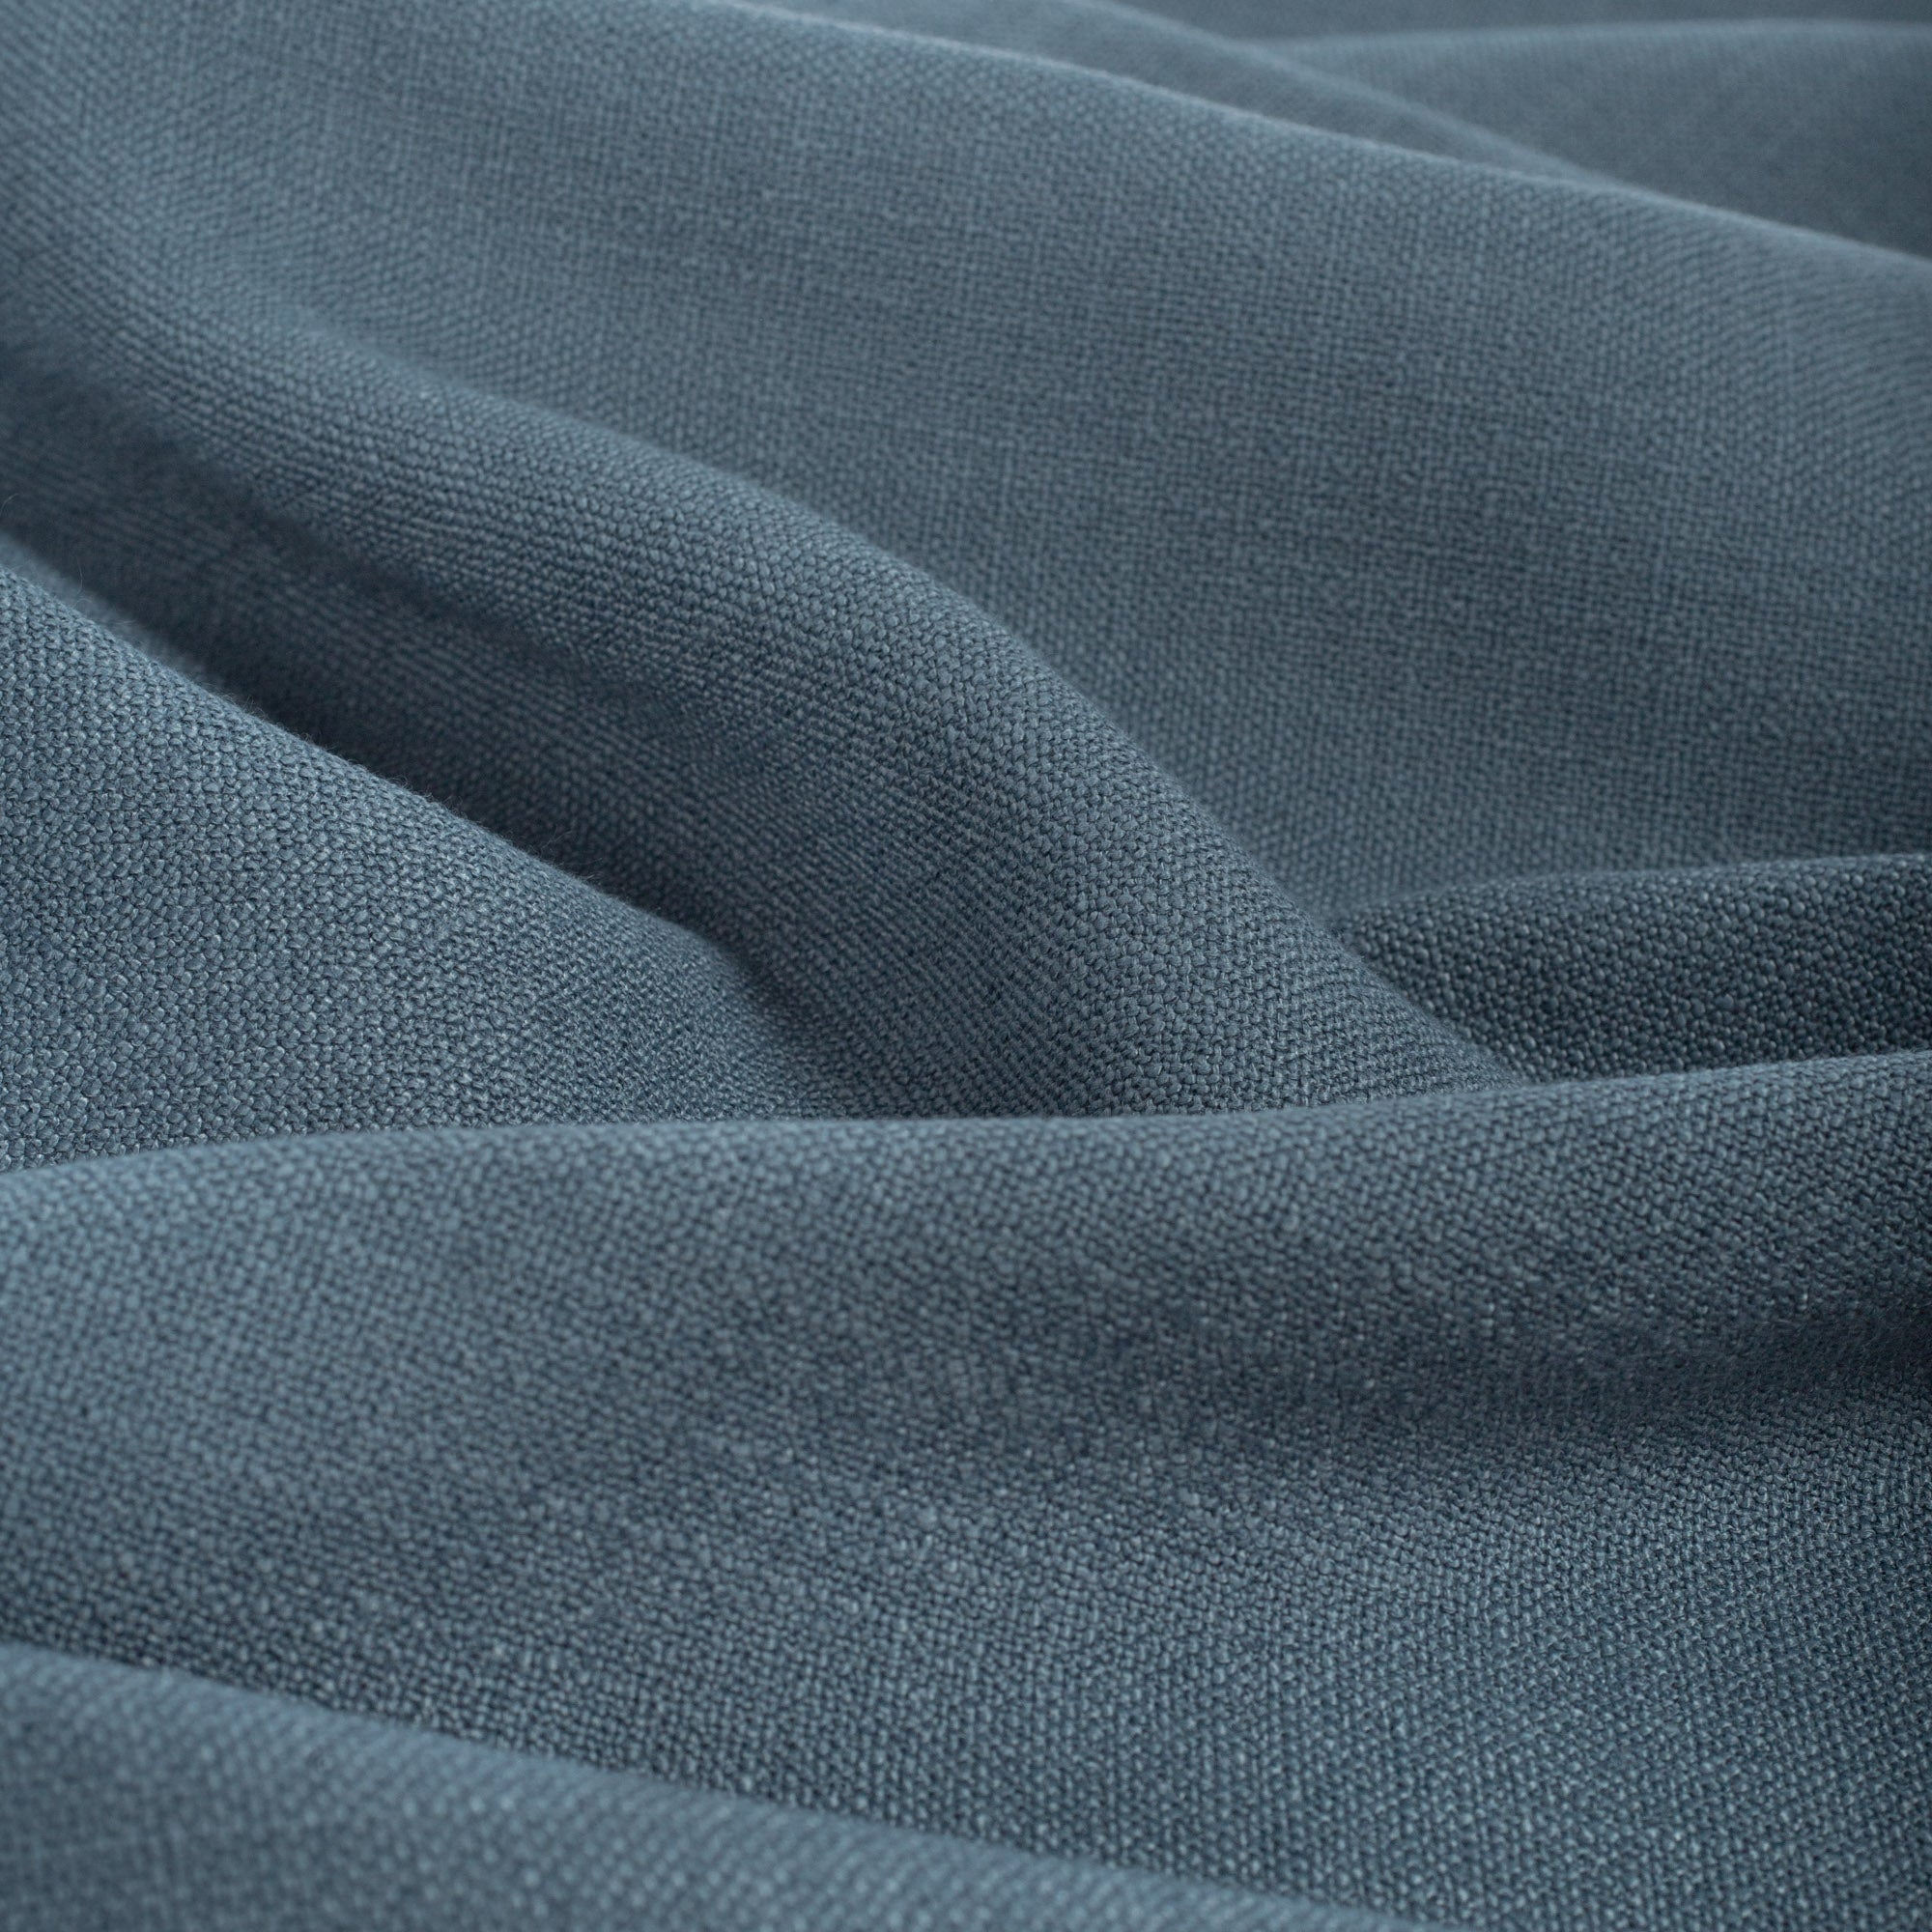 Grange Fabric Storm Blue, a high performance denim blue upholstery fabric with a subtle textural weave from Tonic Living